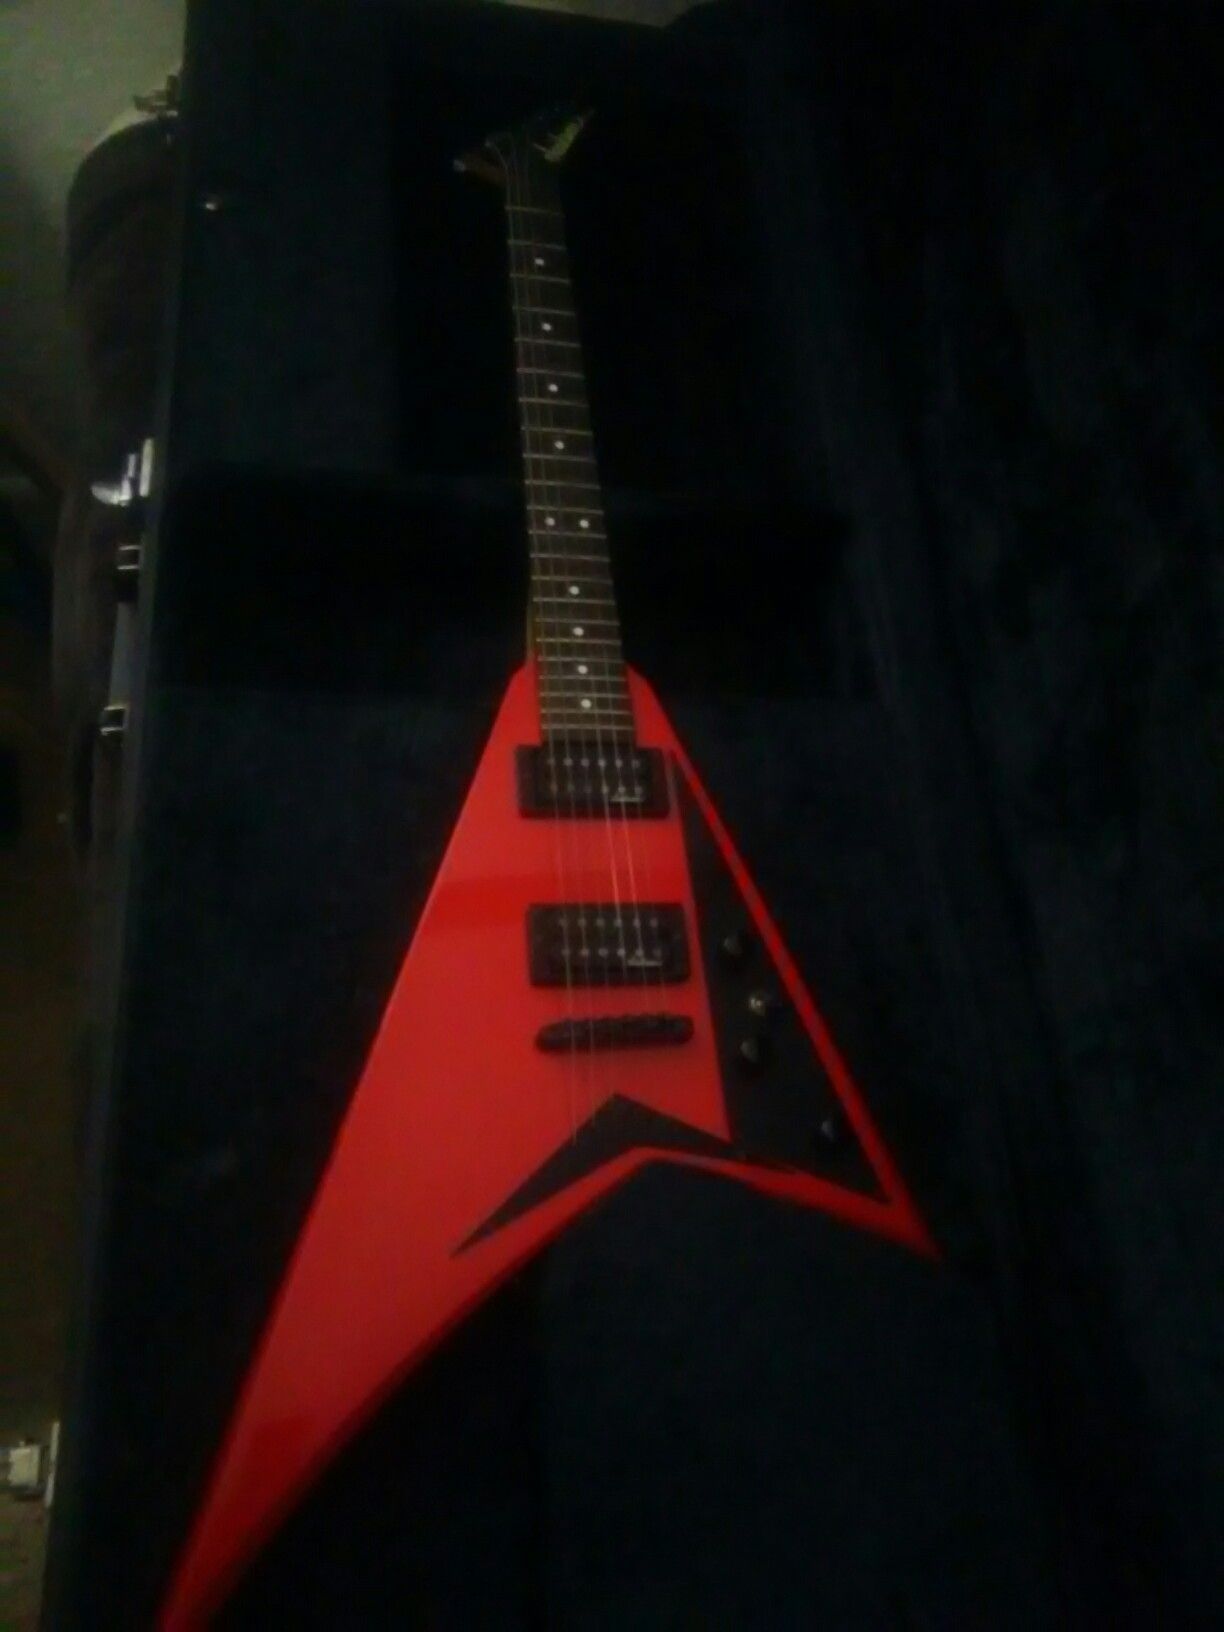 Jackson guitar with case